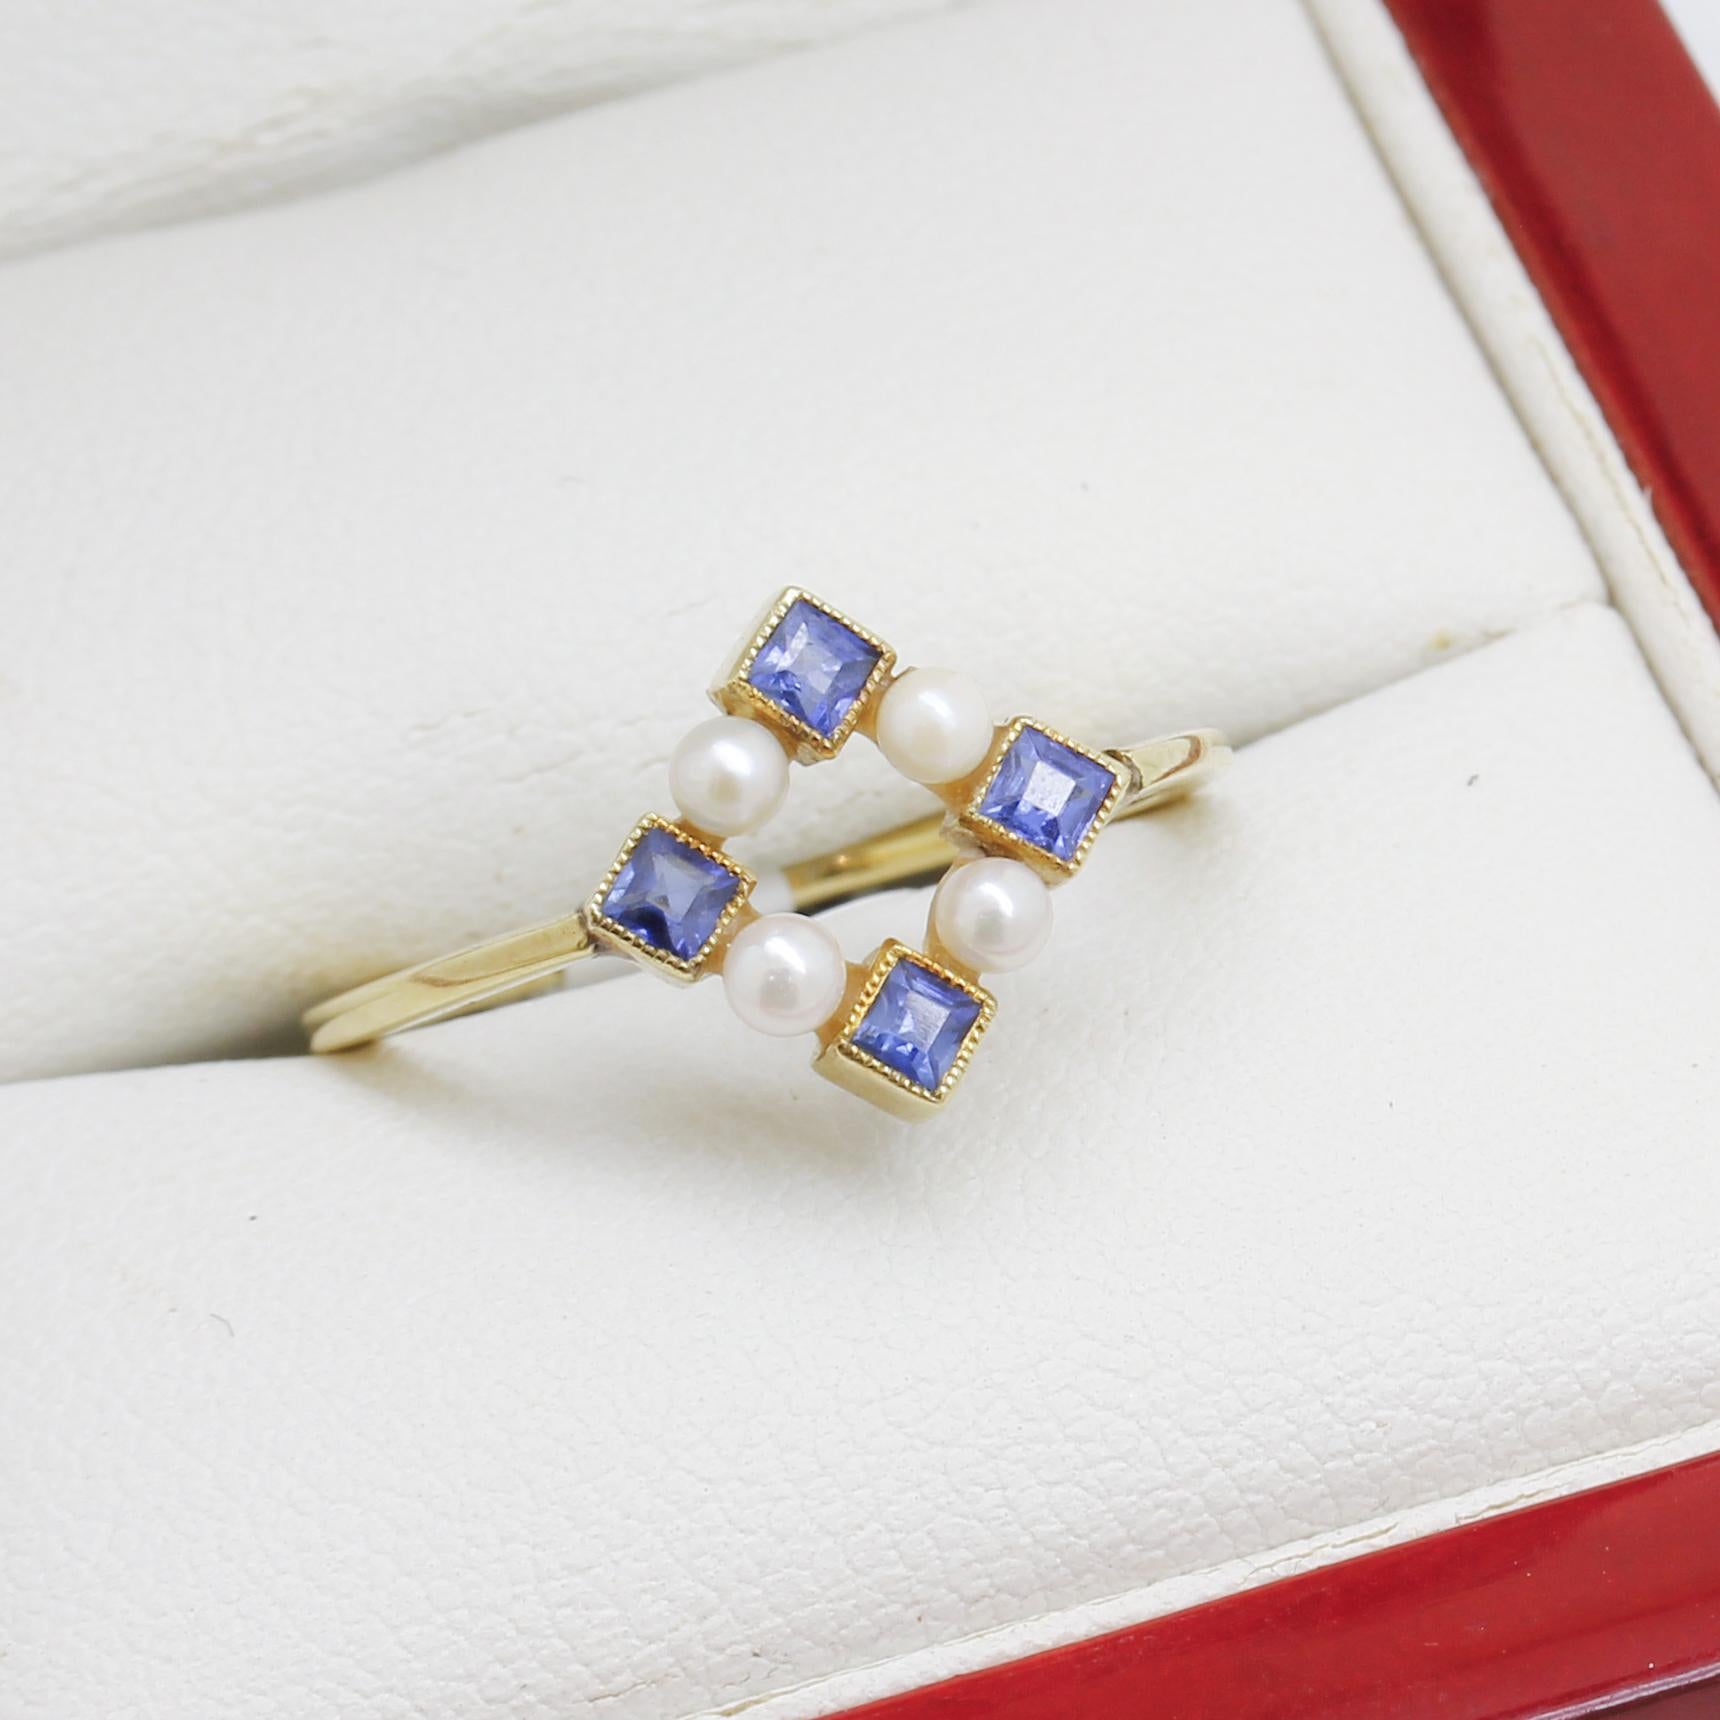 Mix of 18ct & 14ct Yellow gold
4 Princess Sapphires 2 x 2mm
4 Pearls  2.5mm dia
Item Weight: 2.46g
Size - O (Can be resized)